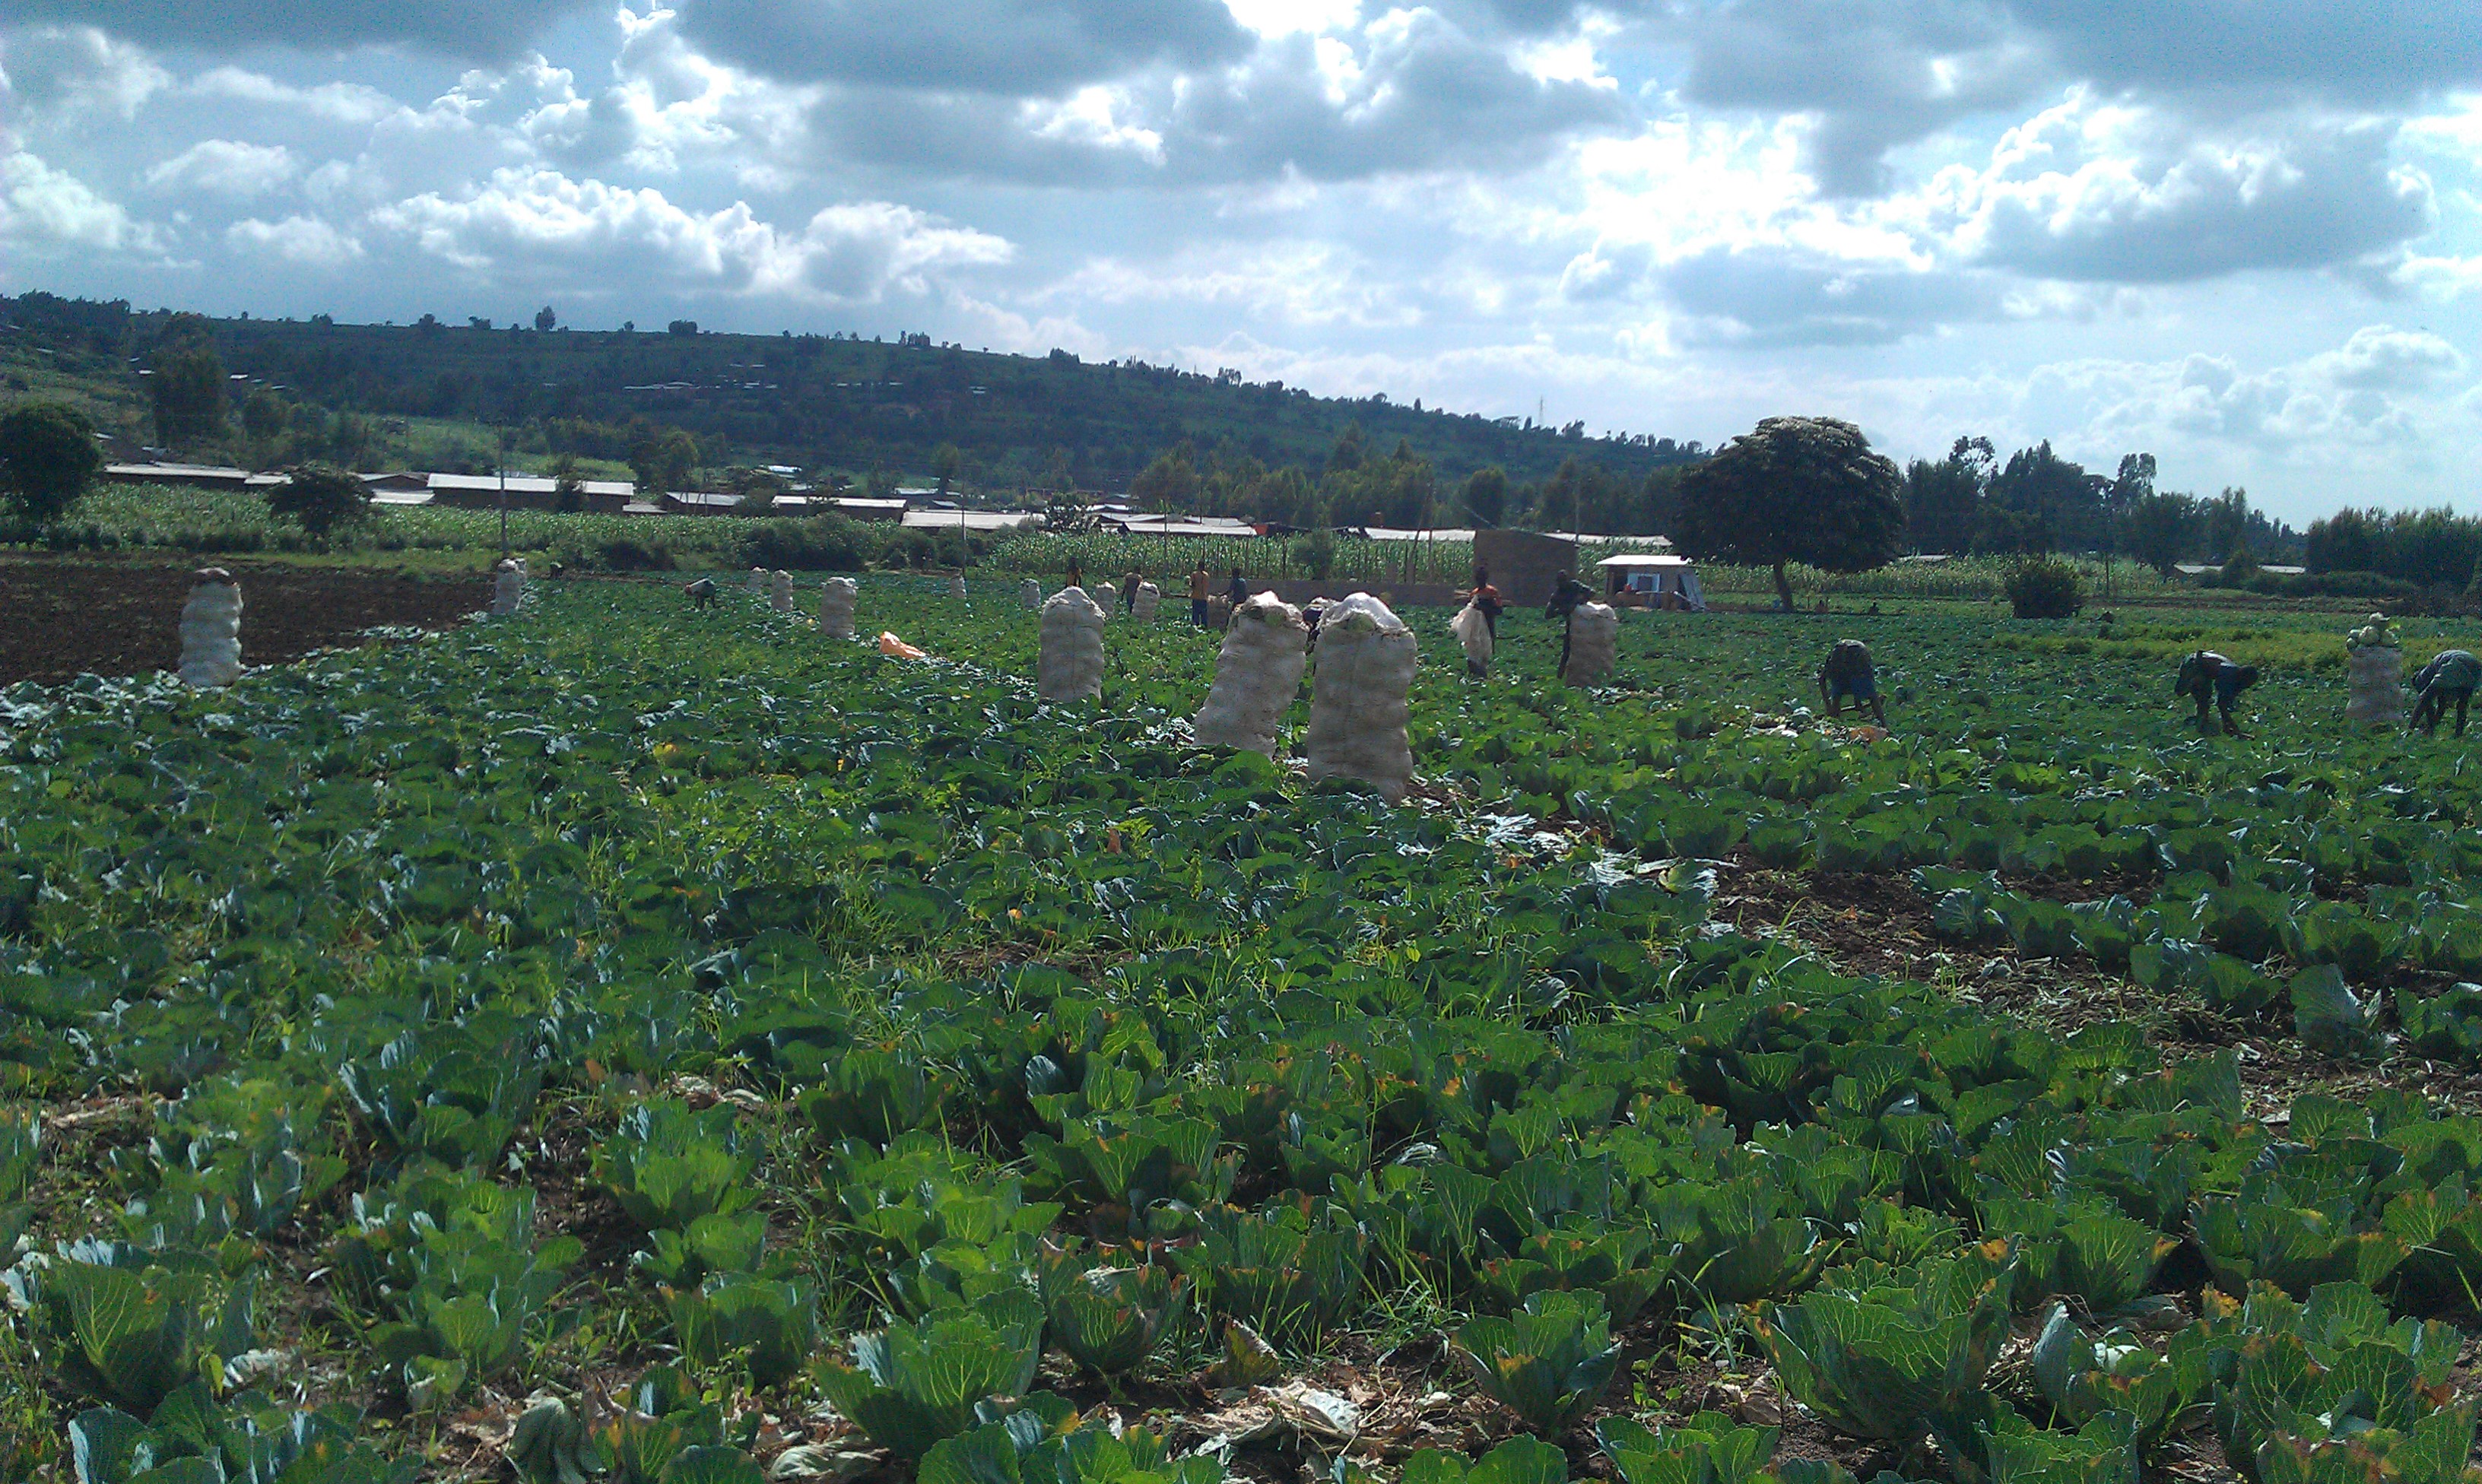 Commercial cabbage production